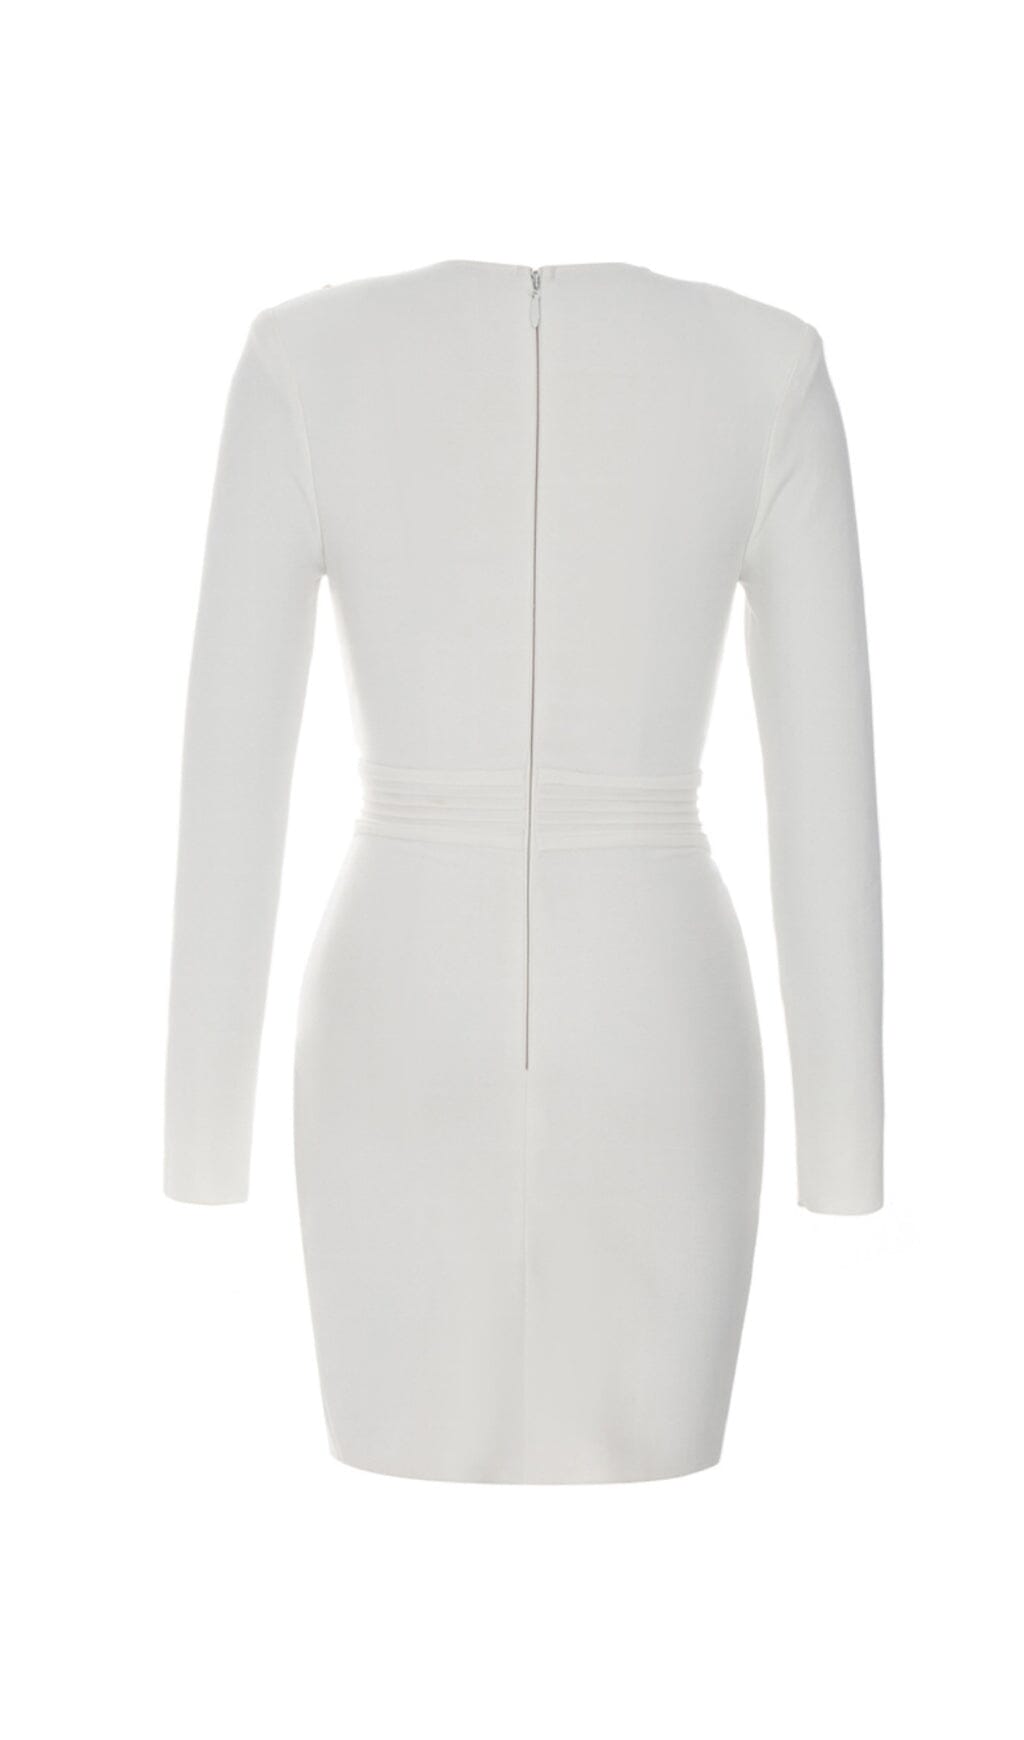 CHAIN KNITTED TIGHT MINI DRESS IN WHITE